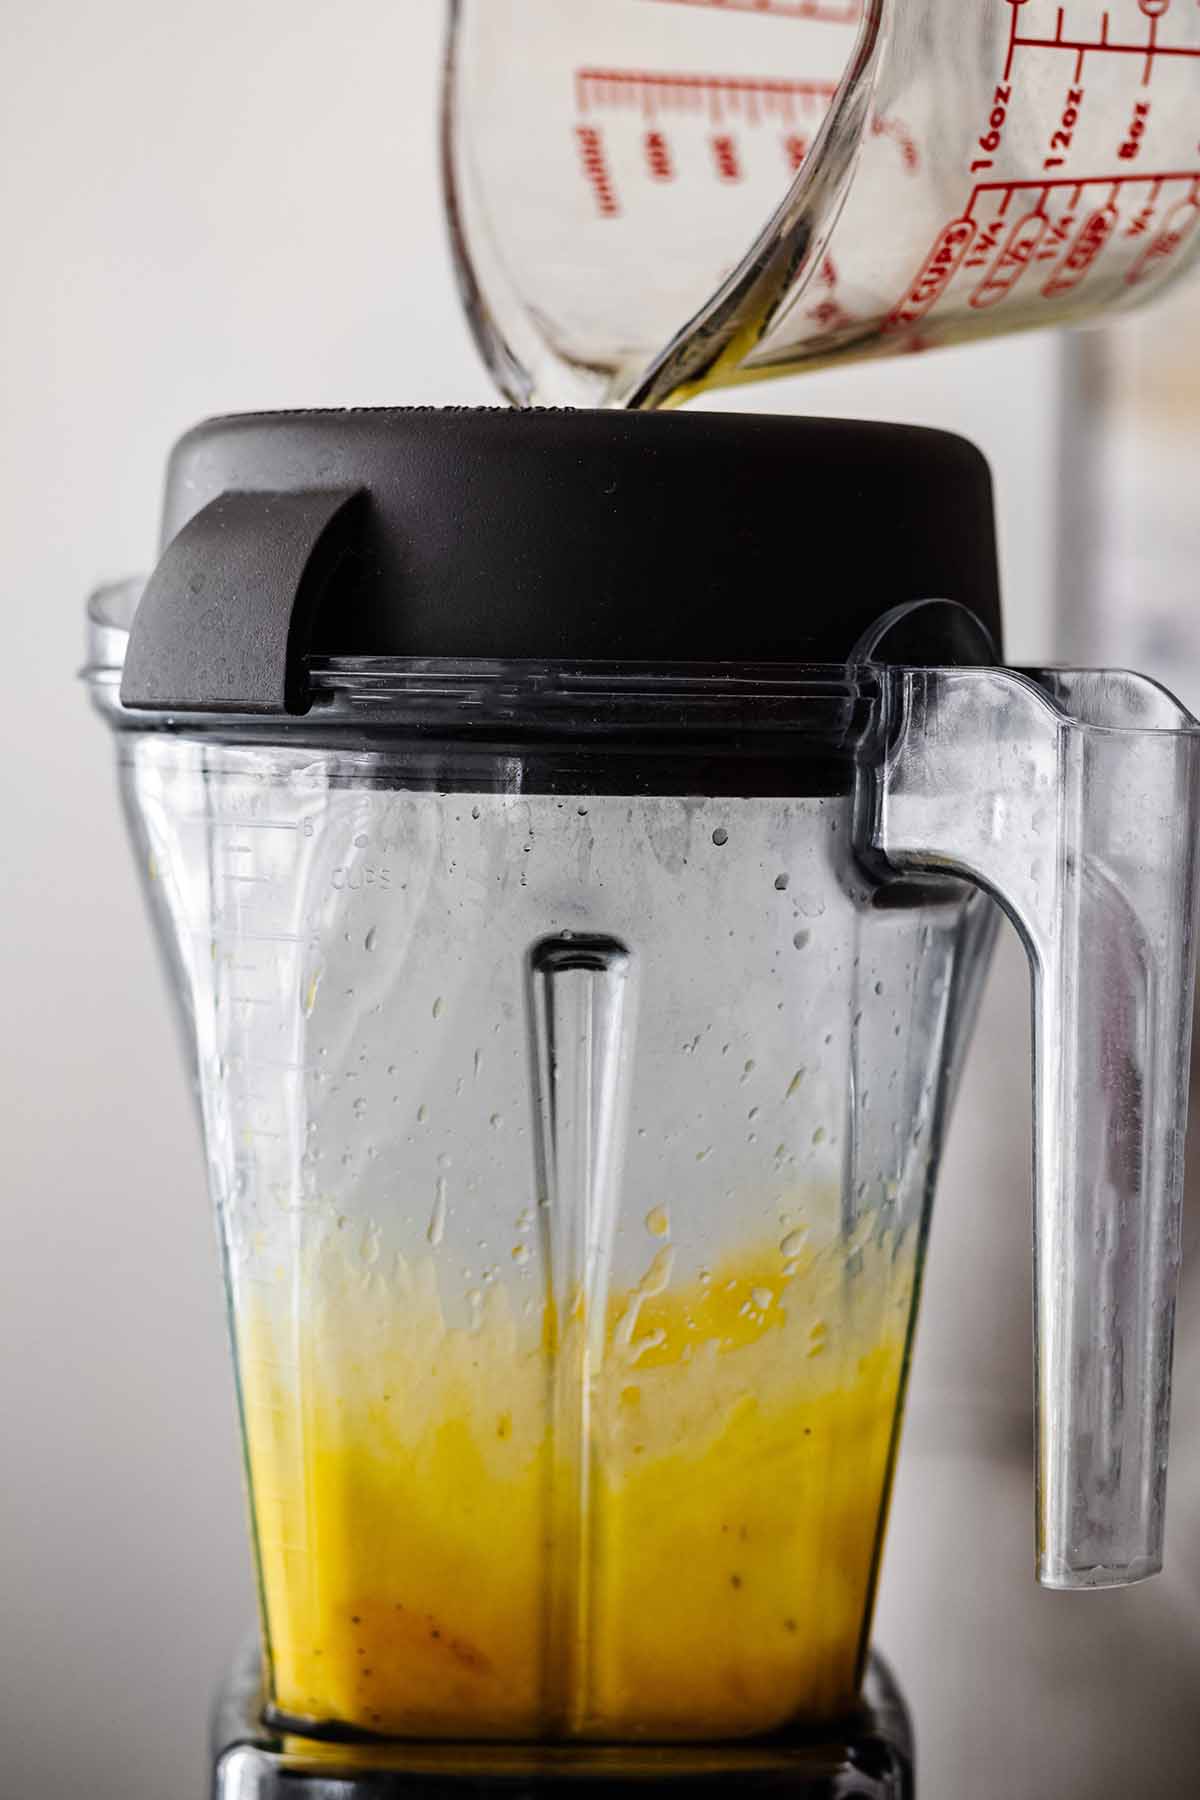 Warm melted butter being poured into a blender